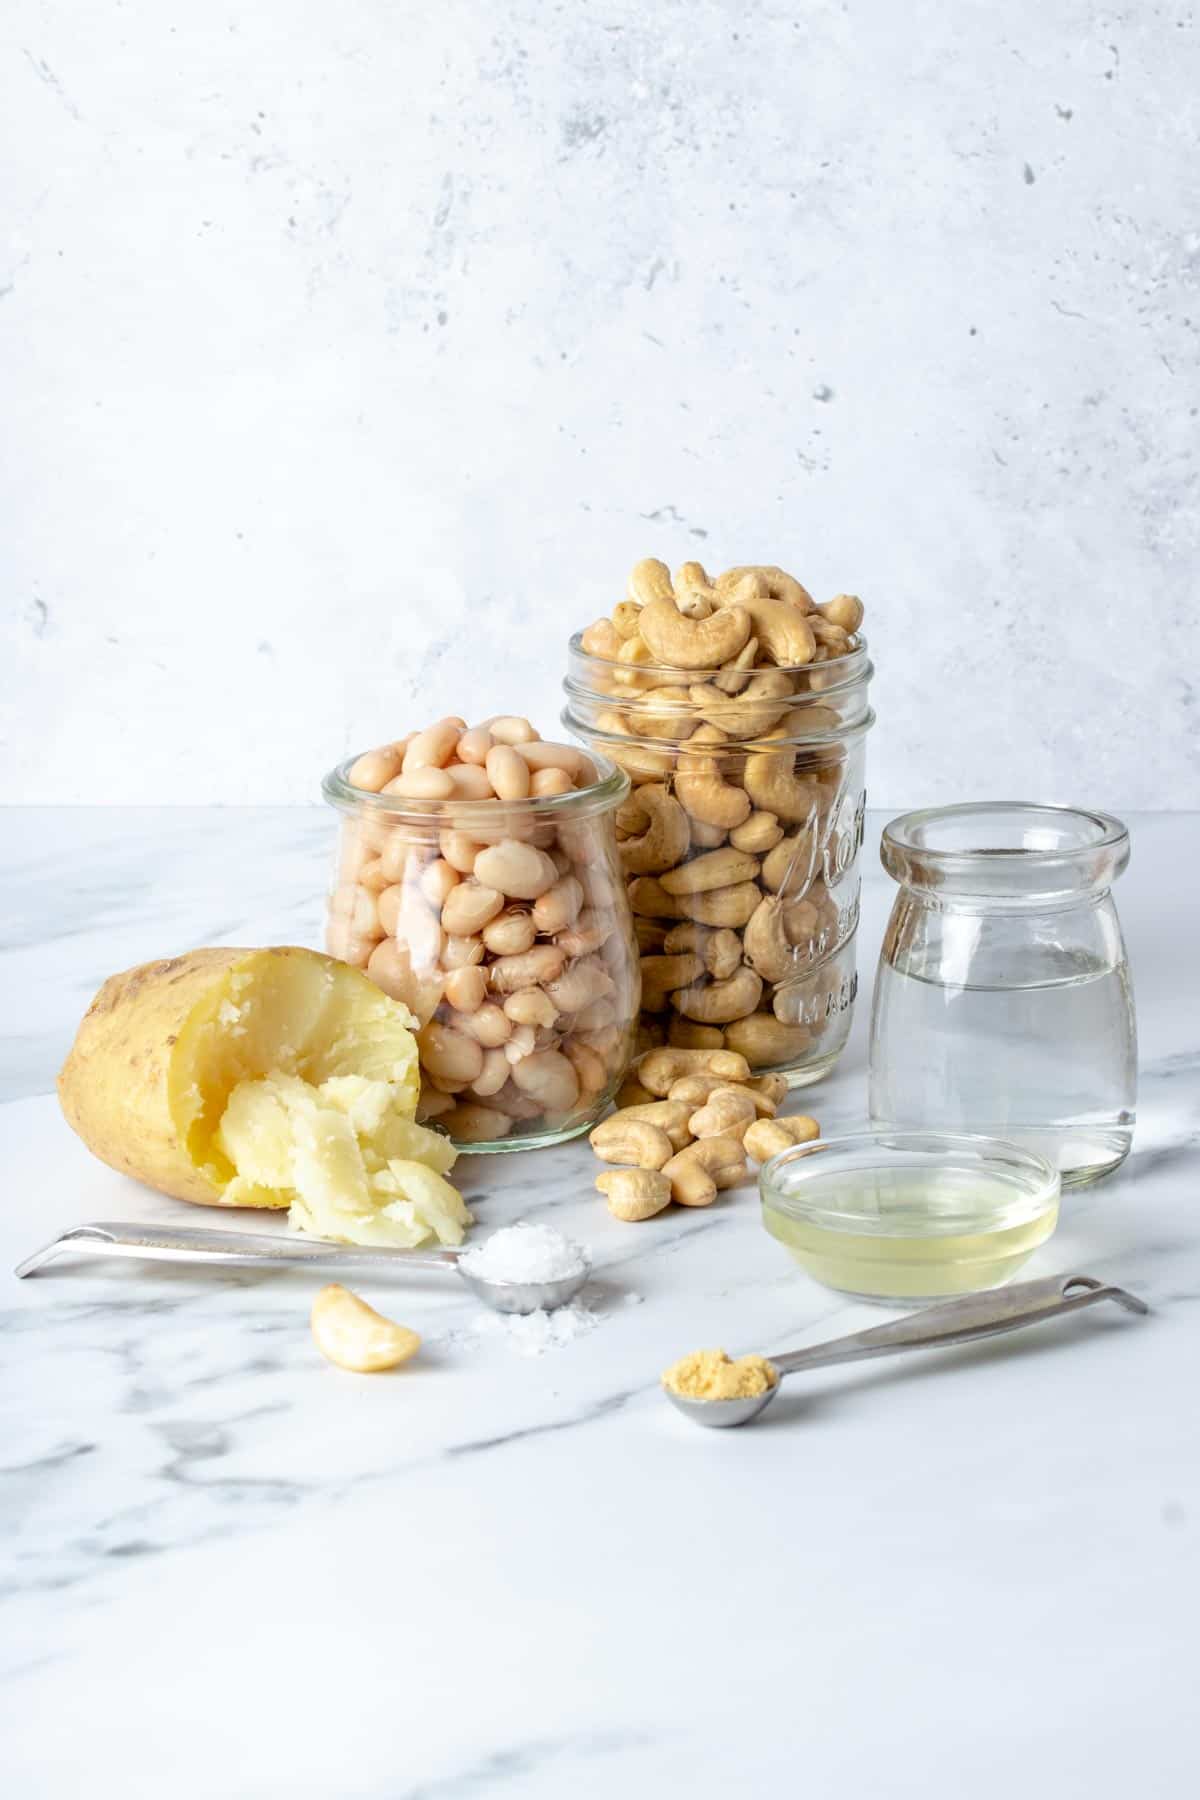 Potato, cashews, white beans, spices and liquids in jars and spoons on a marbled surface.